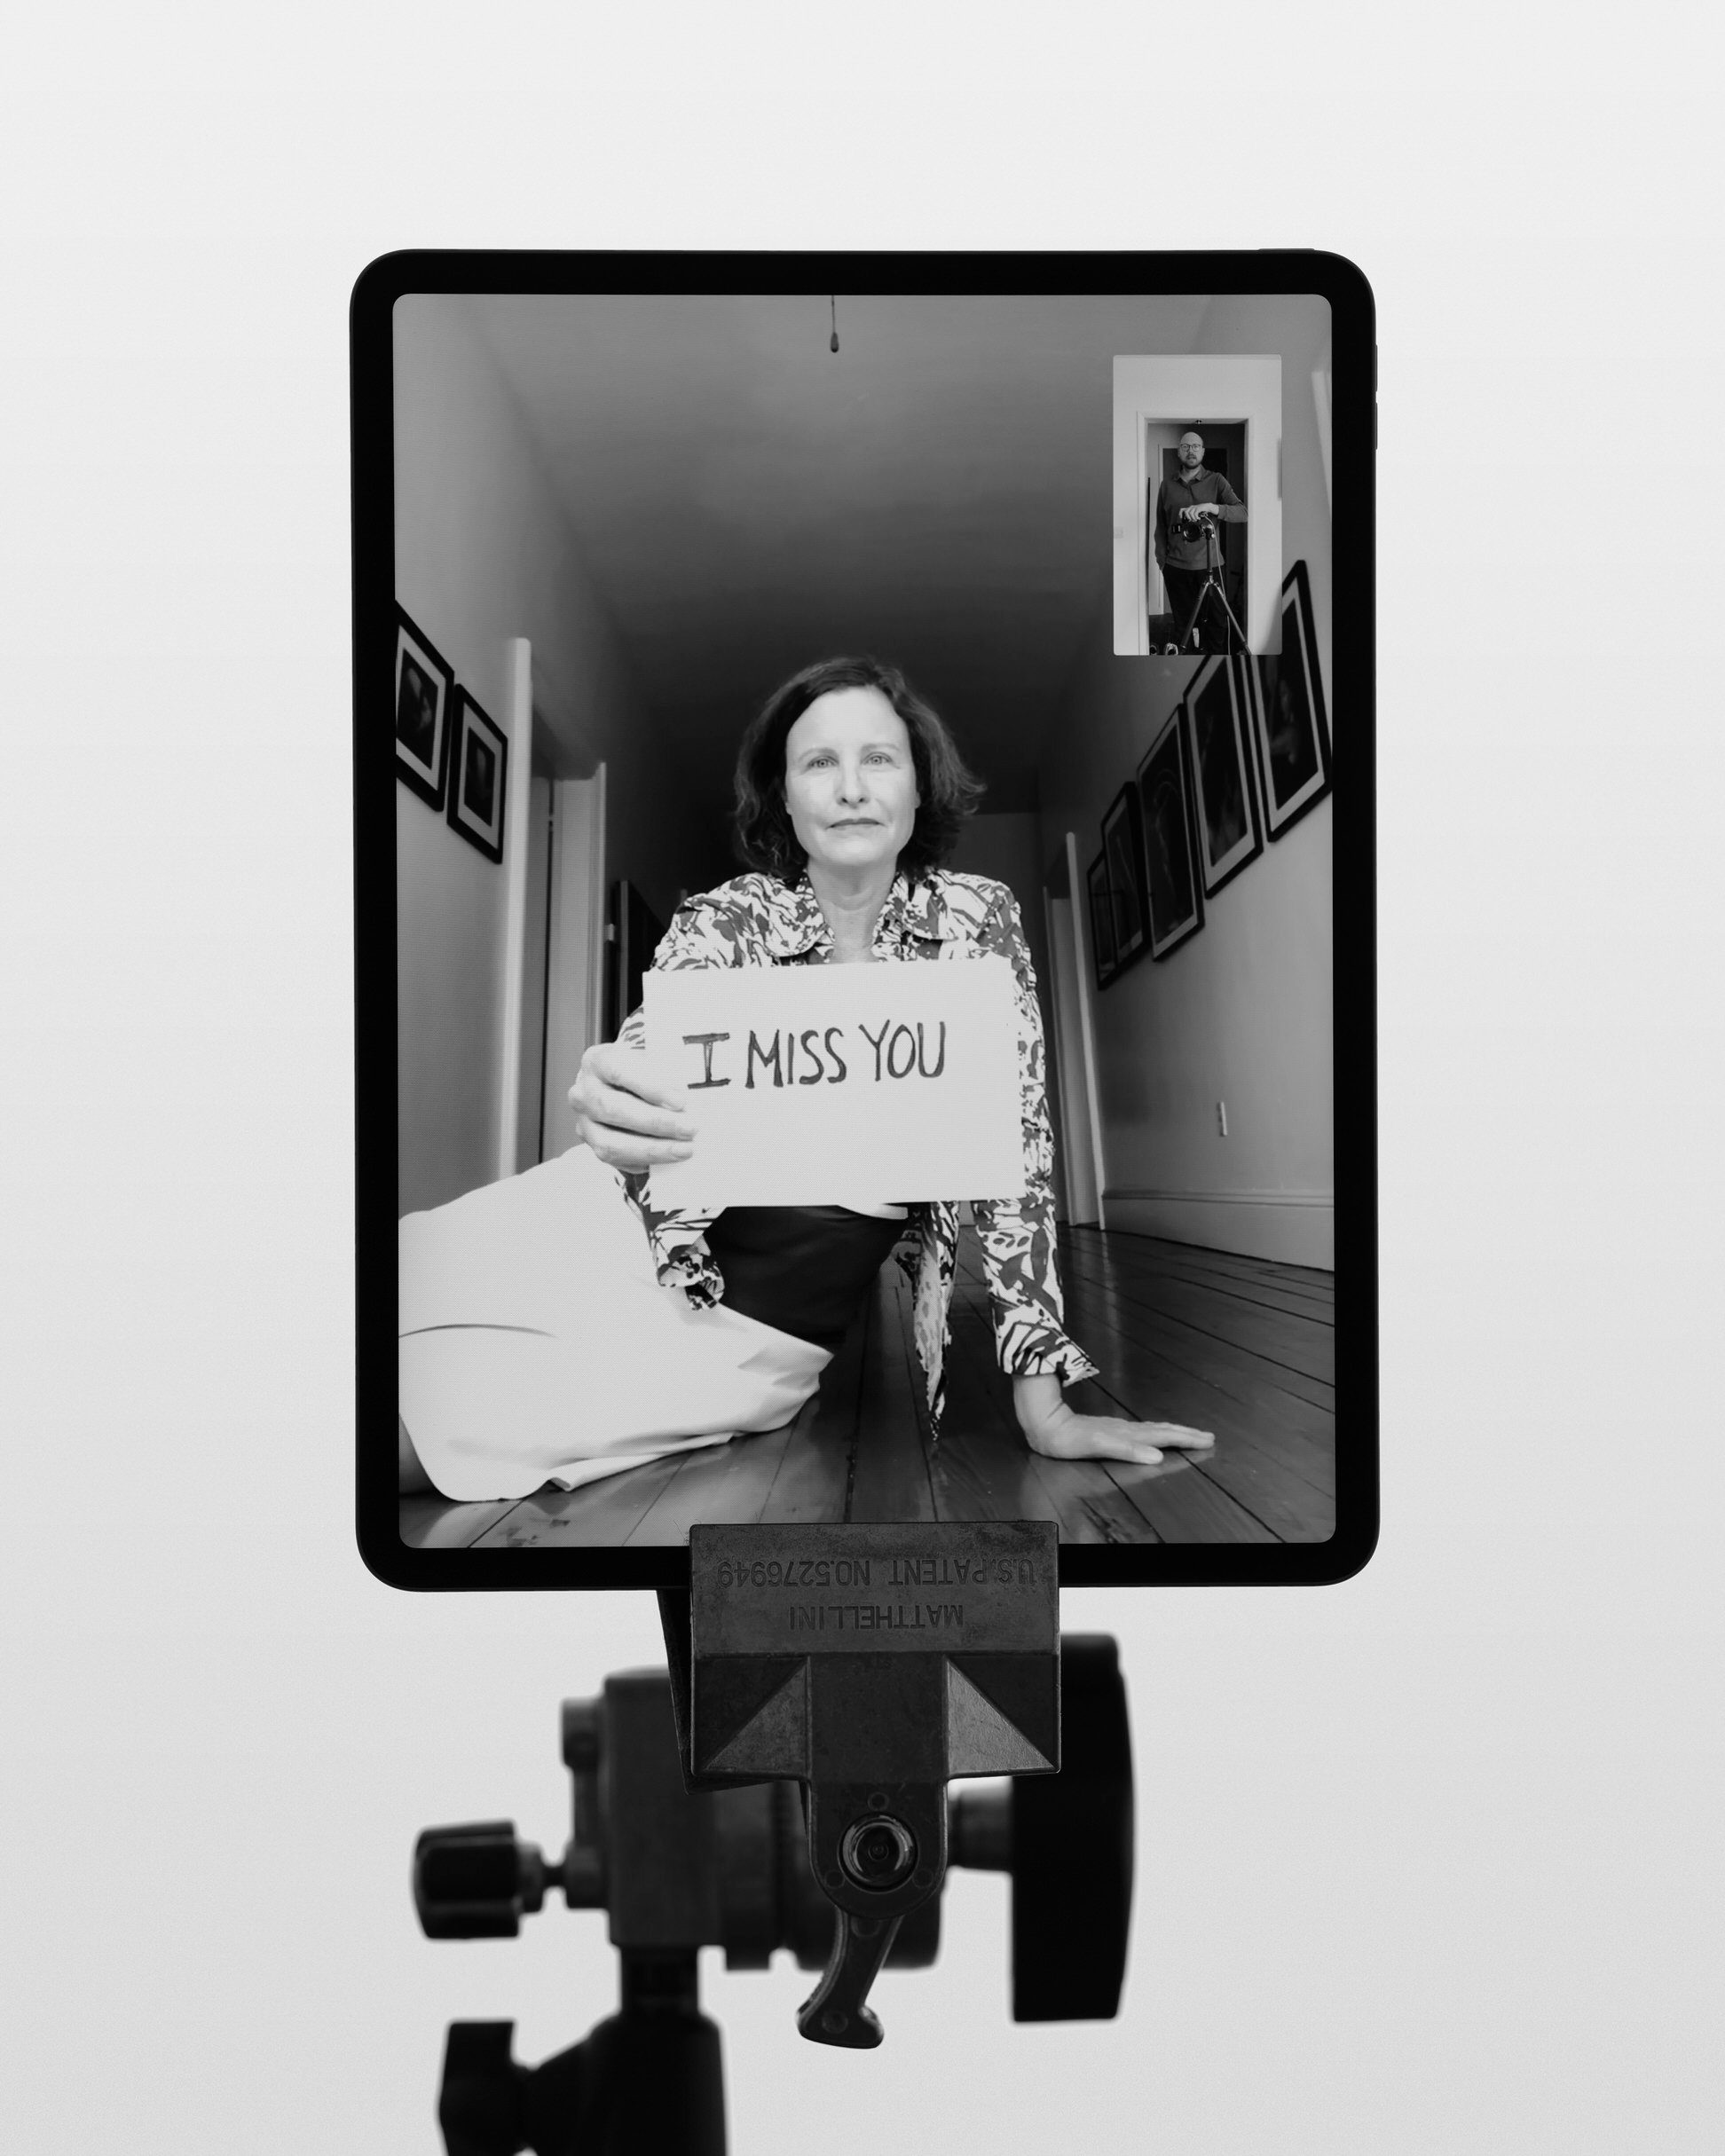 James Hole photographs woman with an I miss you sign in black and white Remote Personal